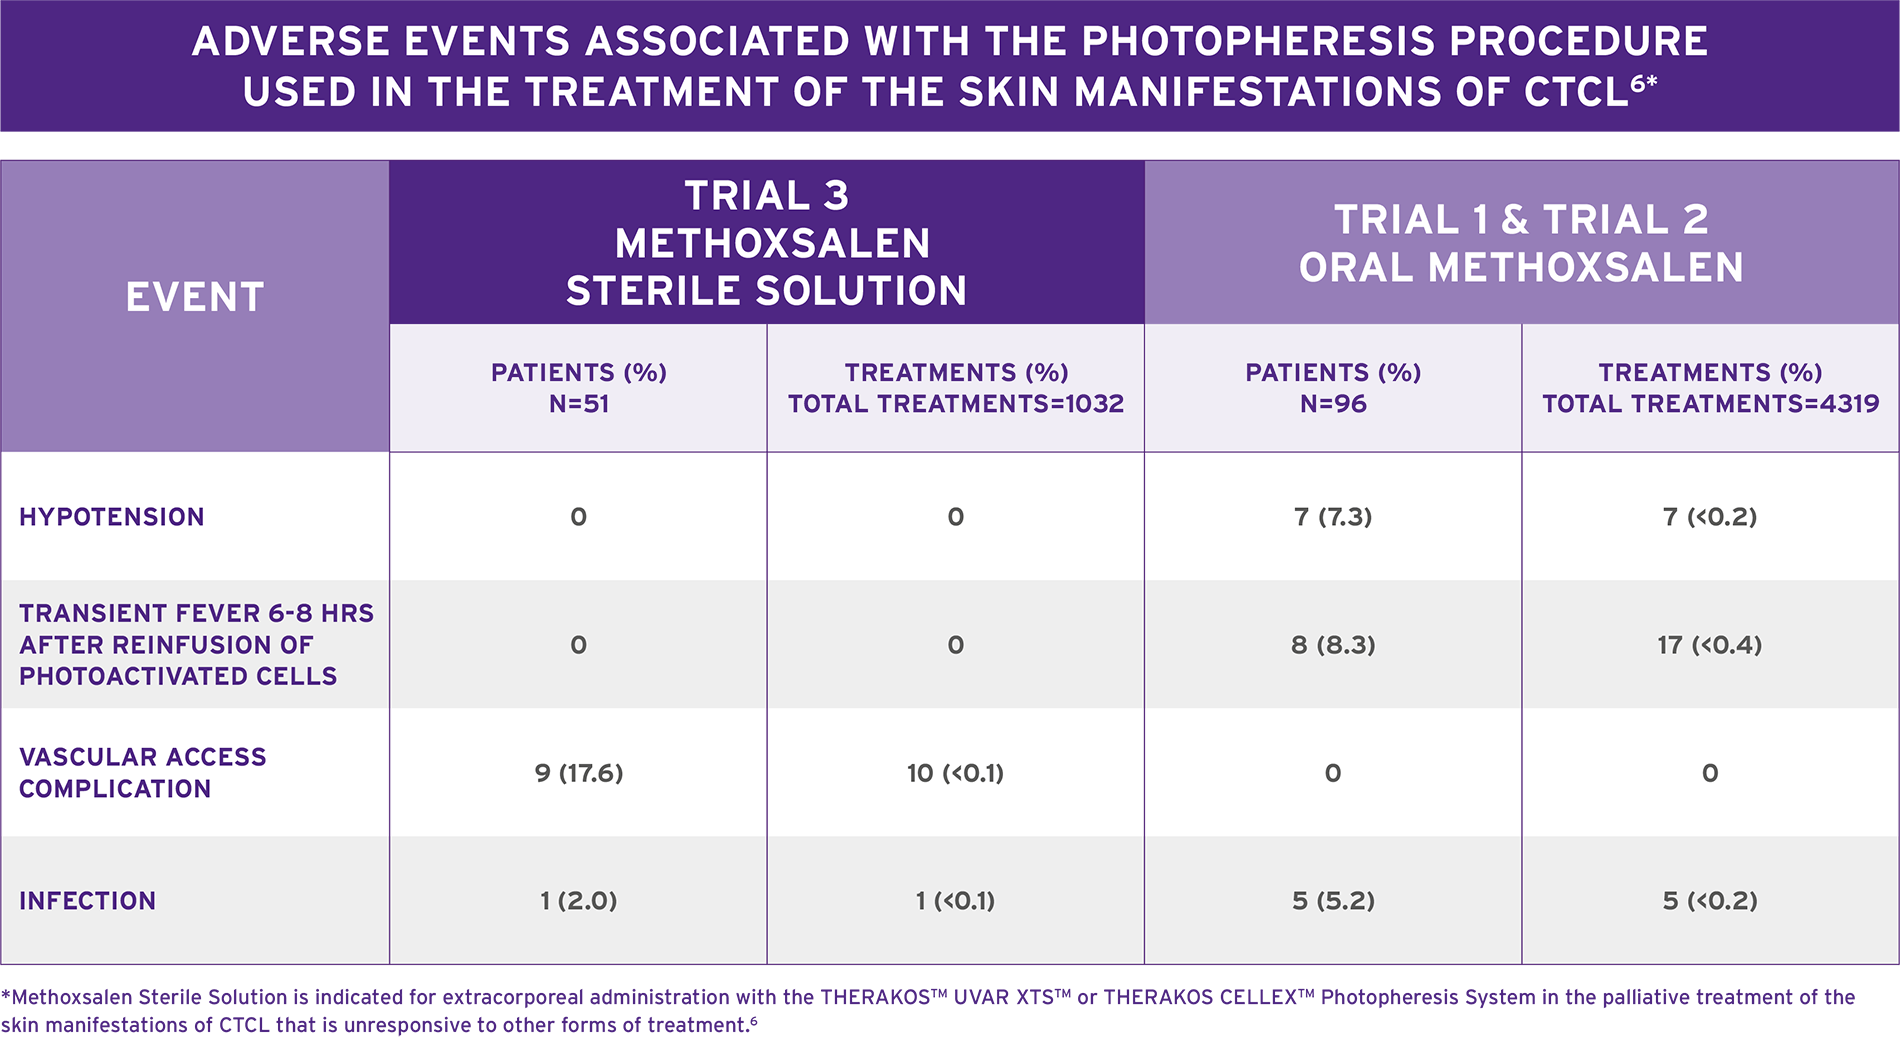 Adverse Events Associated with Photopheresis